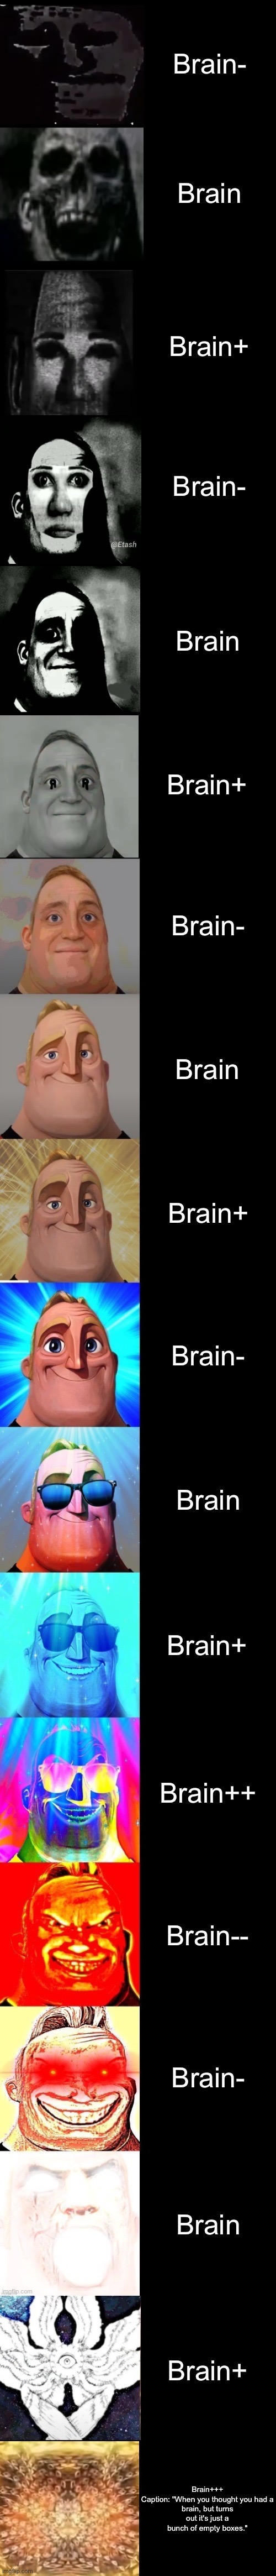 Mr Incredible from Trollge to God | Brain-; Brain; Brain+; Brain-; Brain; Brain+; Brain-; Brain; Brain+; Brain-; Brain; Brain+; Brain++; Brain--; Brain-; Brain; Brain+; Brain+++

Caption: "When you thought you had a brain, but turns out it's just a bunch of empty boxes." | image tagged in mr incredible from trollge to god | made w/ Imgflip meme maker